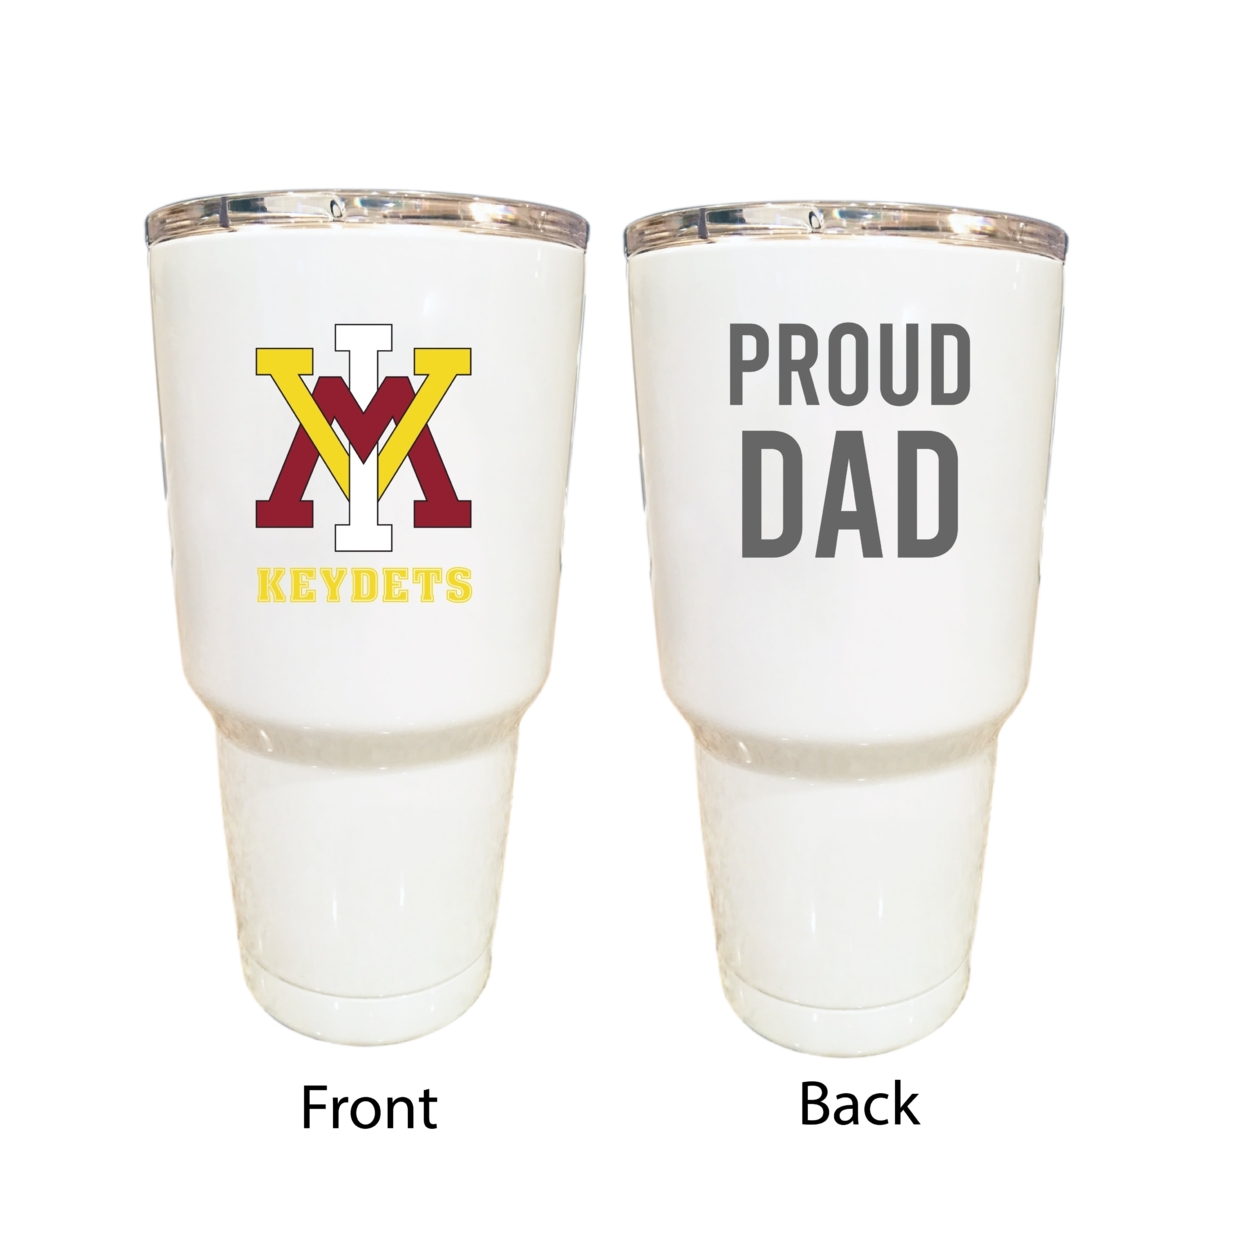 VMI Keydets Proud Dad 24 Oz Insulated Stainless Steel Tumblers Choose Your Color. - White